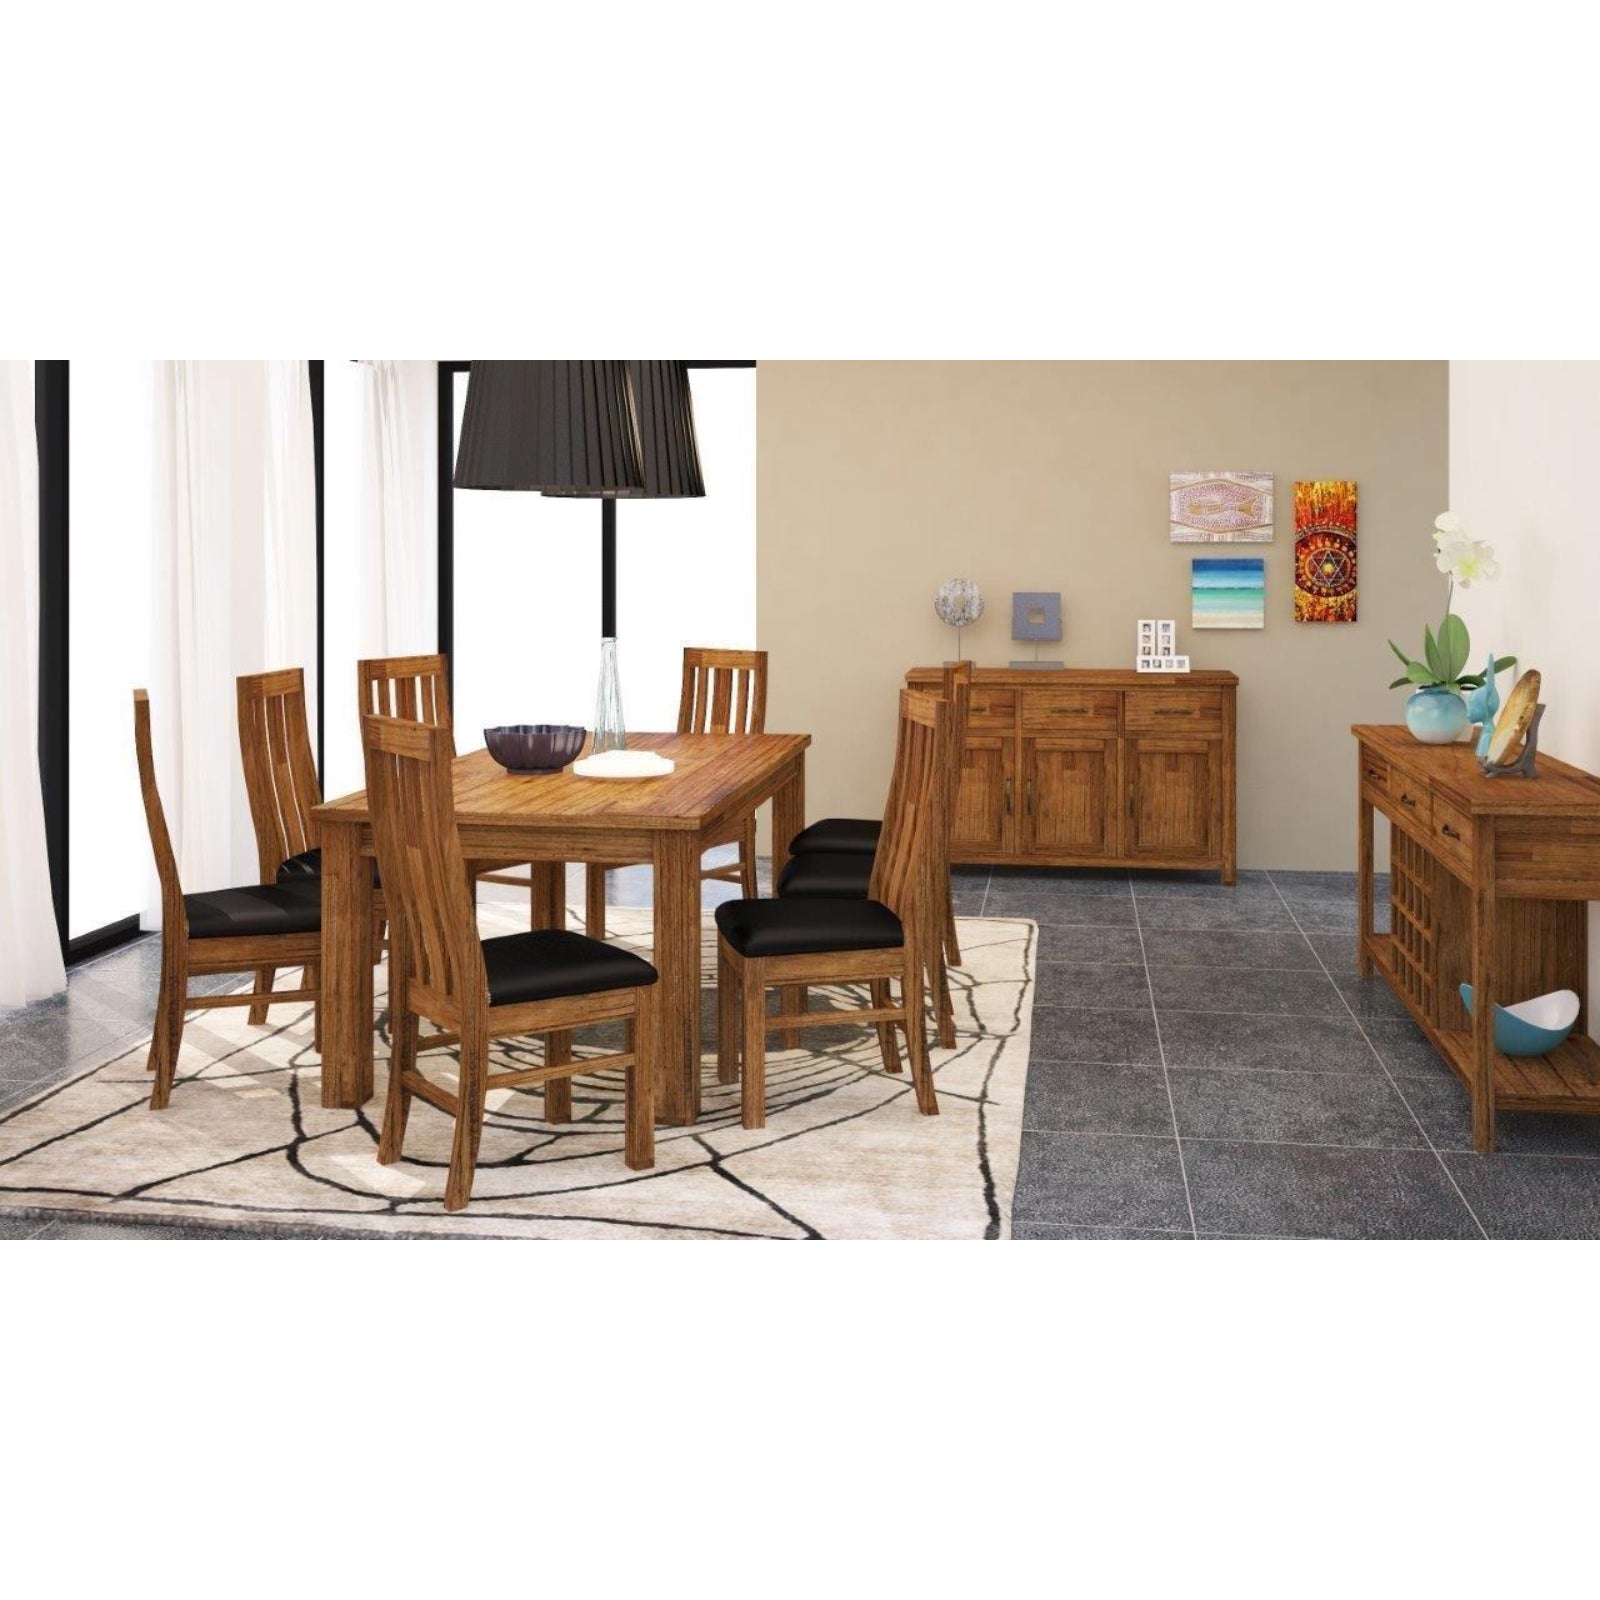 7Pc Dining Set 190Cm Table 6 Pu Seat Chair Solid Mt Ash Wood - Brown